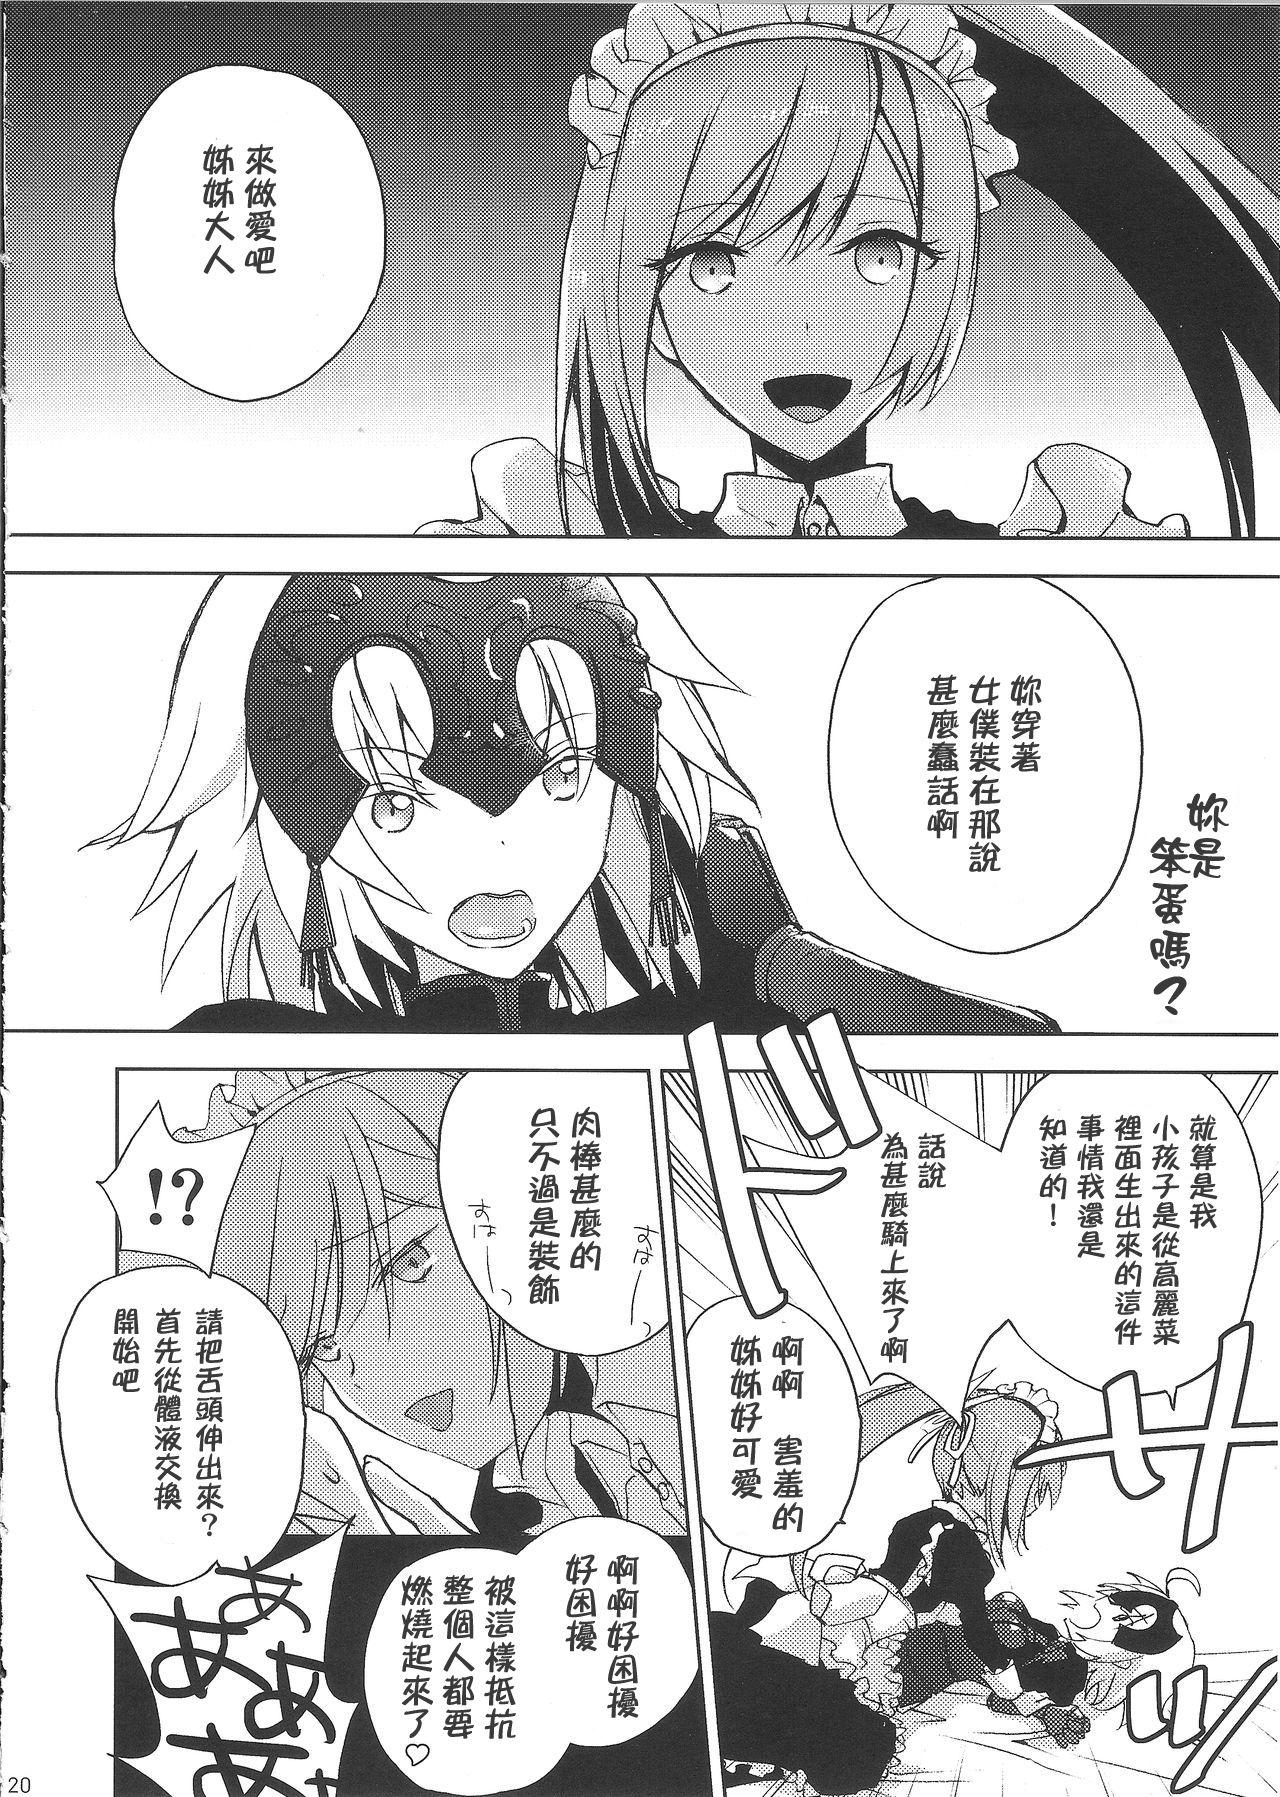 Erotic BLACK EDITION 2 - Fate grand order Toying - Page 18